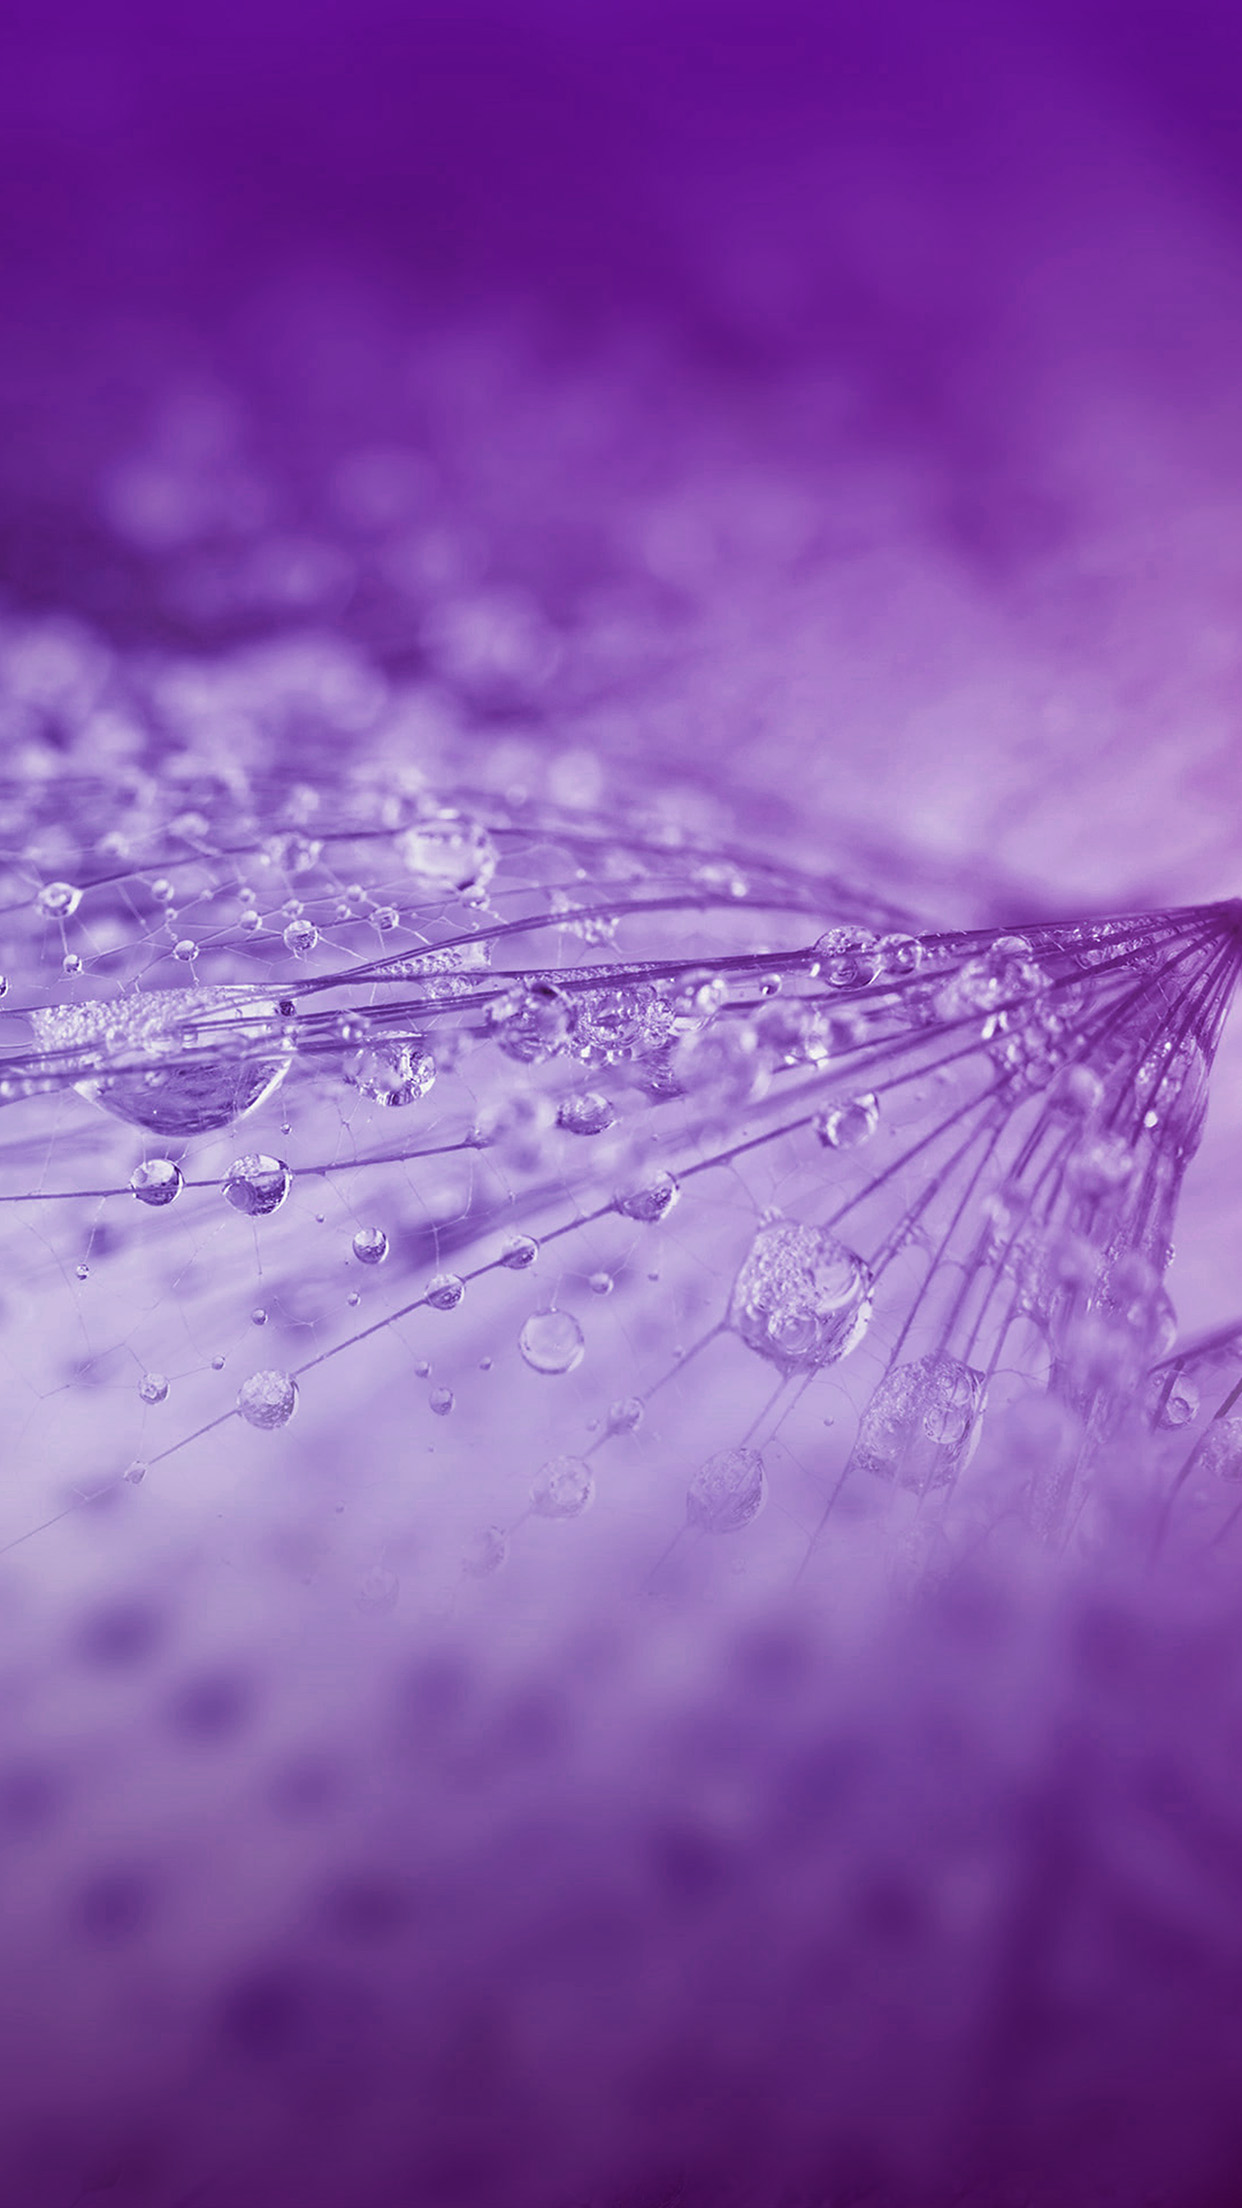 Nature Rain Drop Flower Purple Pattern Android Wallpaper Android Hd Wallpapers